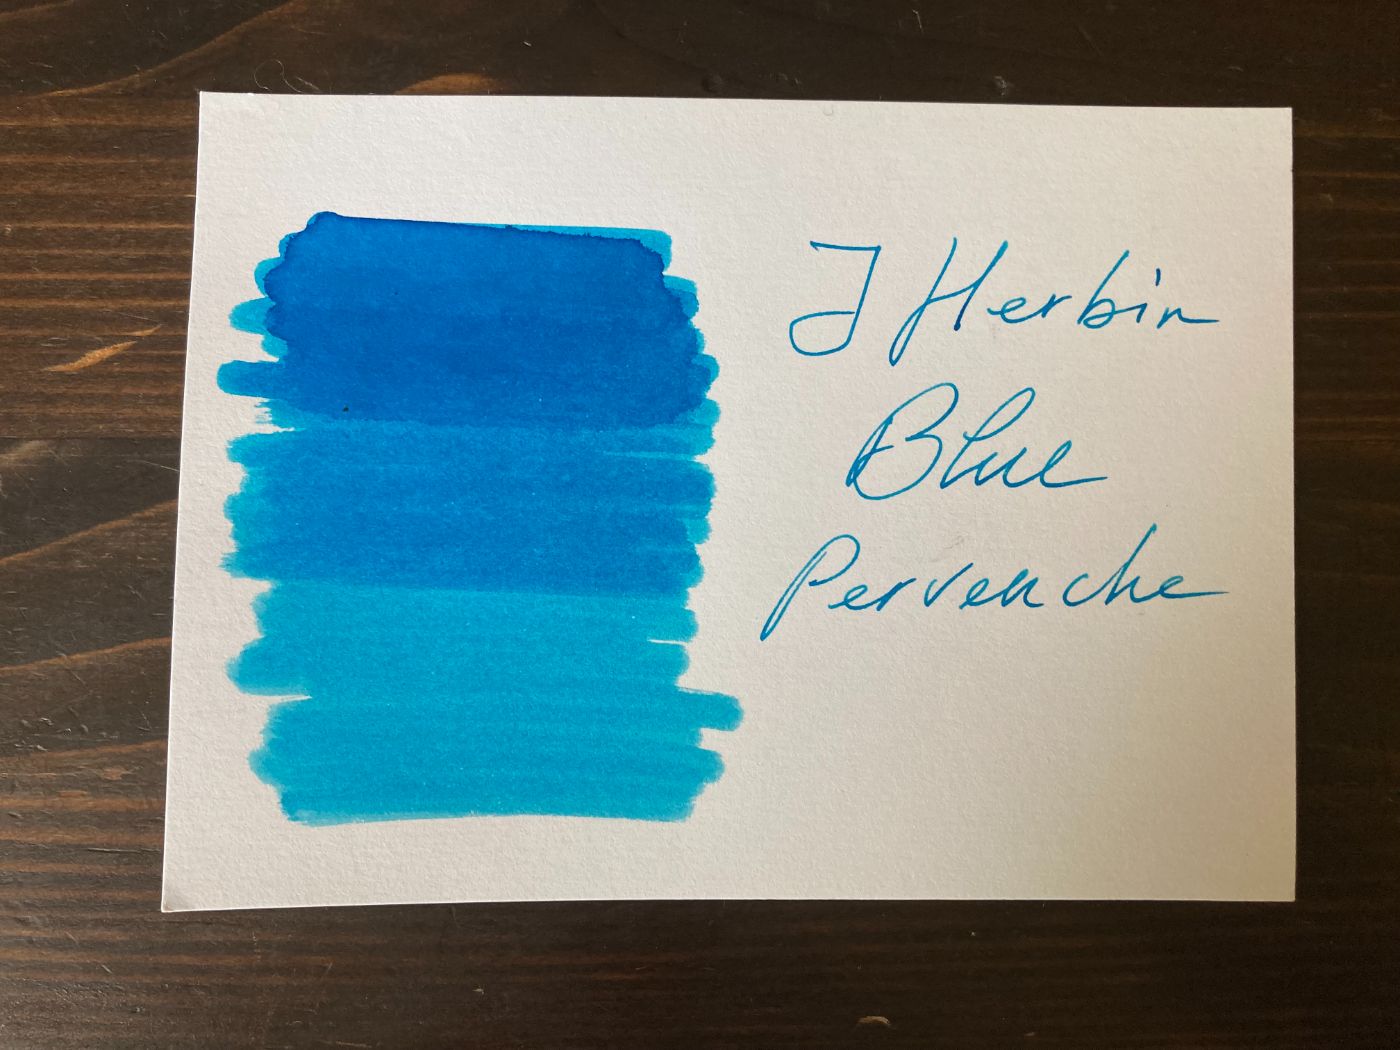 https://onepenshow.com/media/pages/ink/best-behaved/6e4161db1f-1644924621/herbin-blue-pervenche.jpg